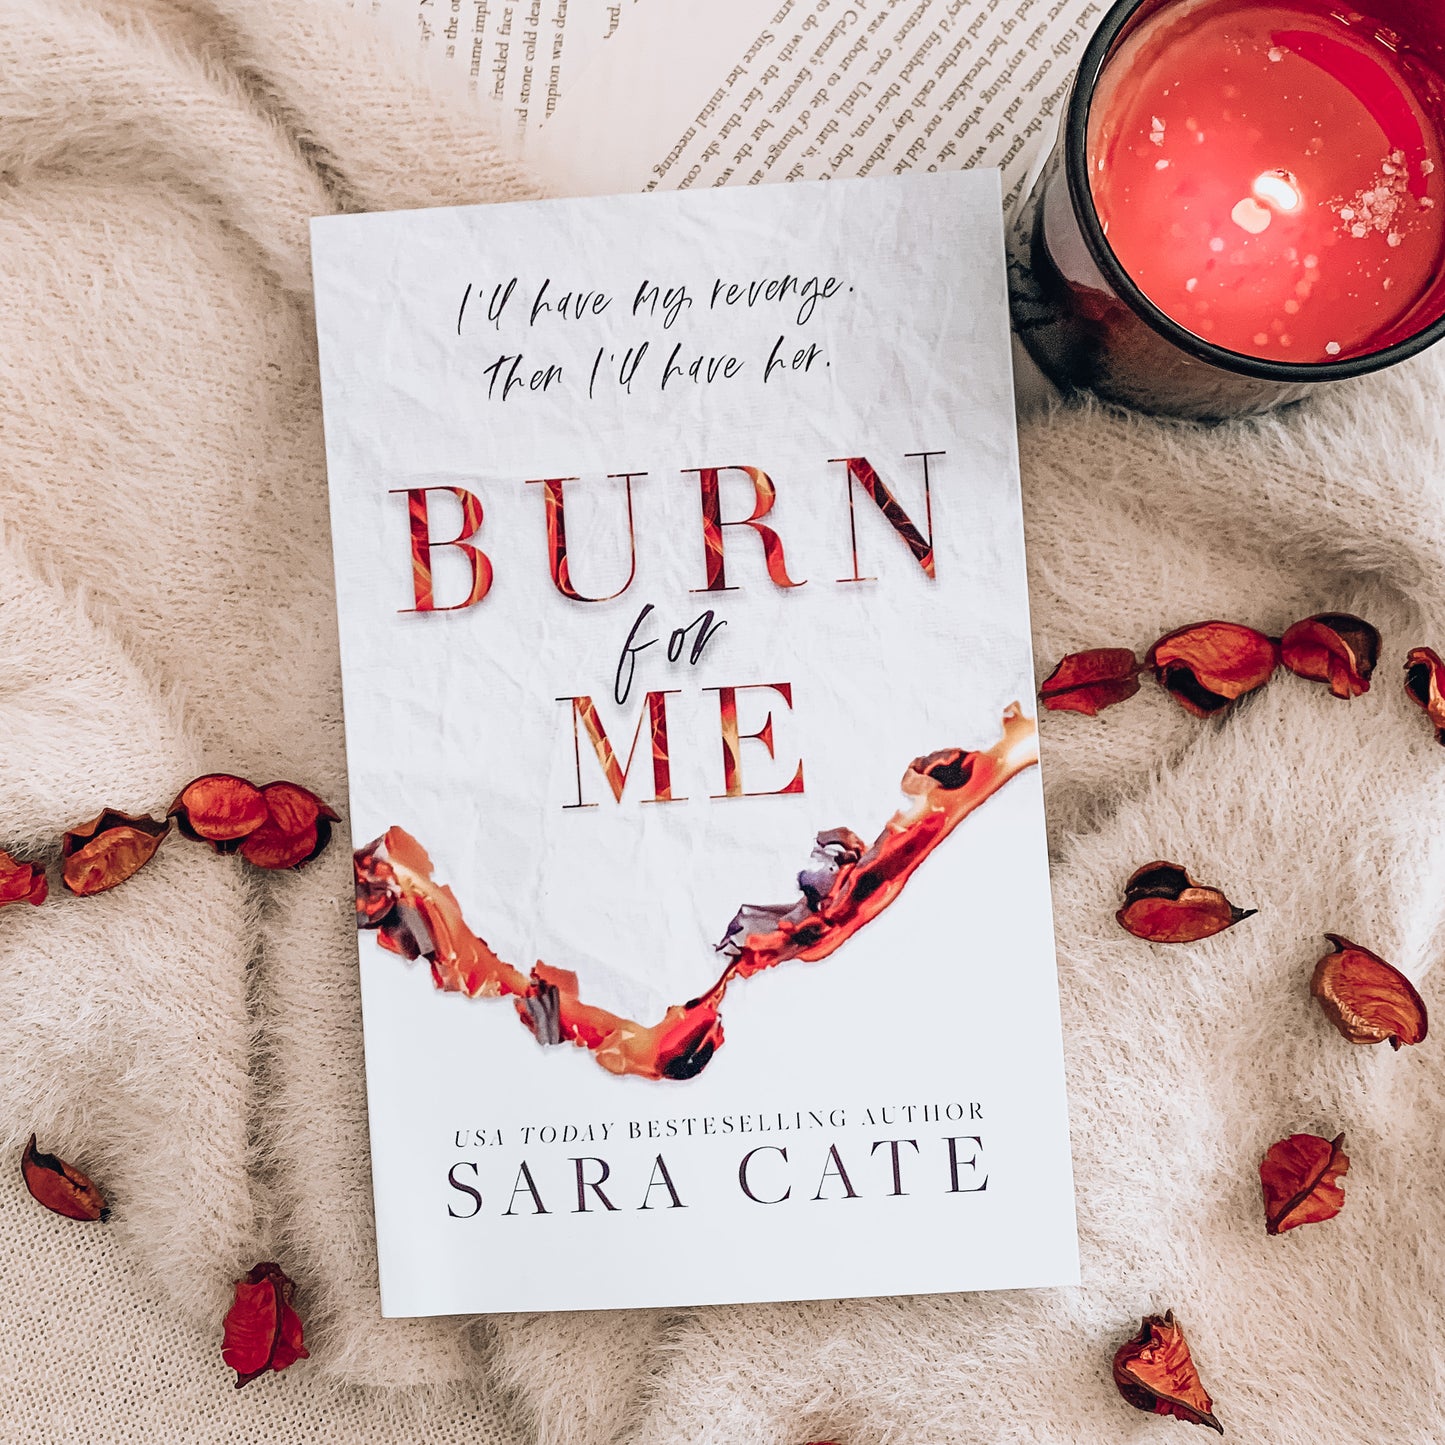 Burn for Me (Special Edition) by Sara Cate